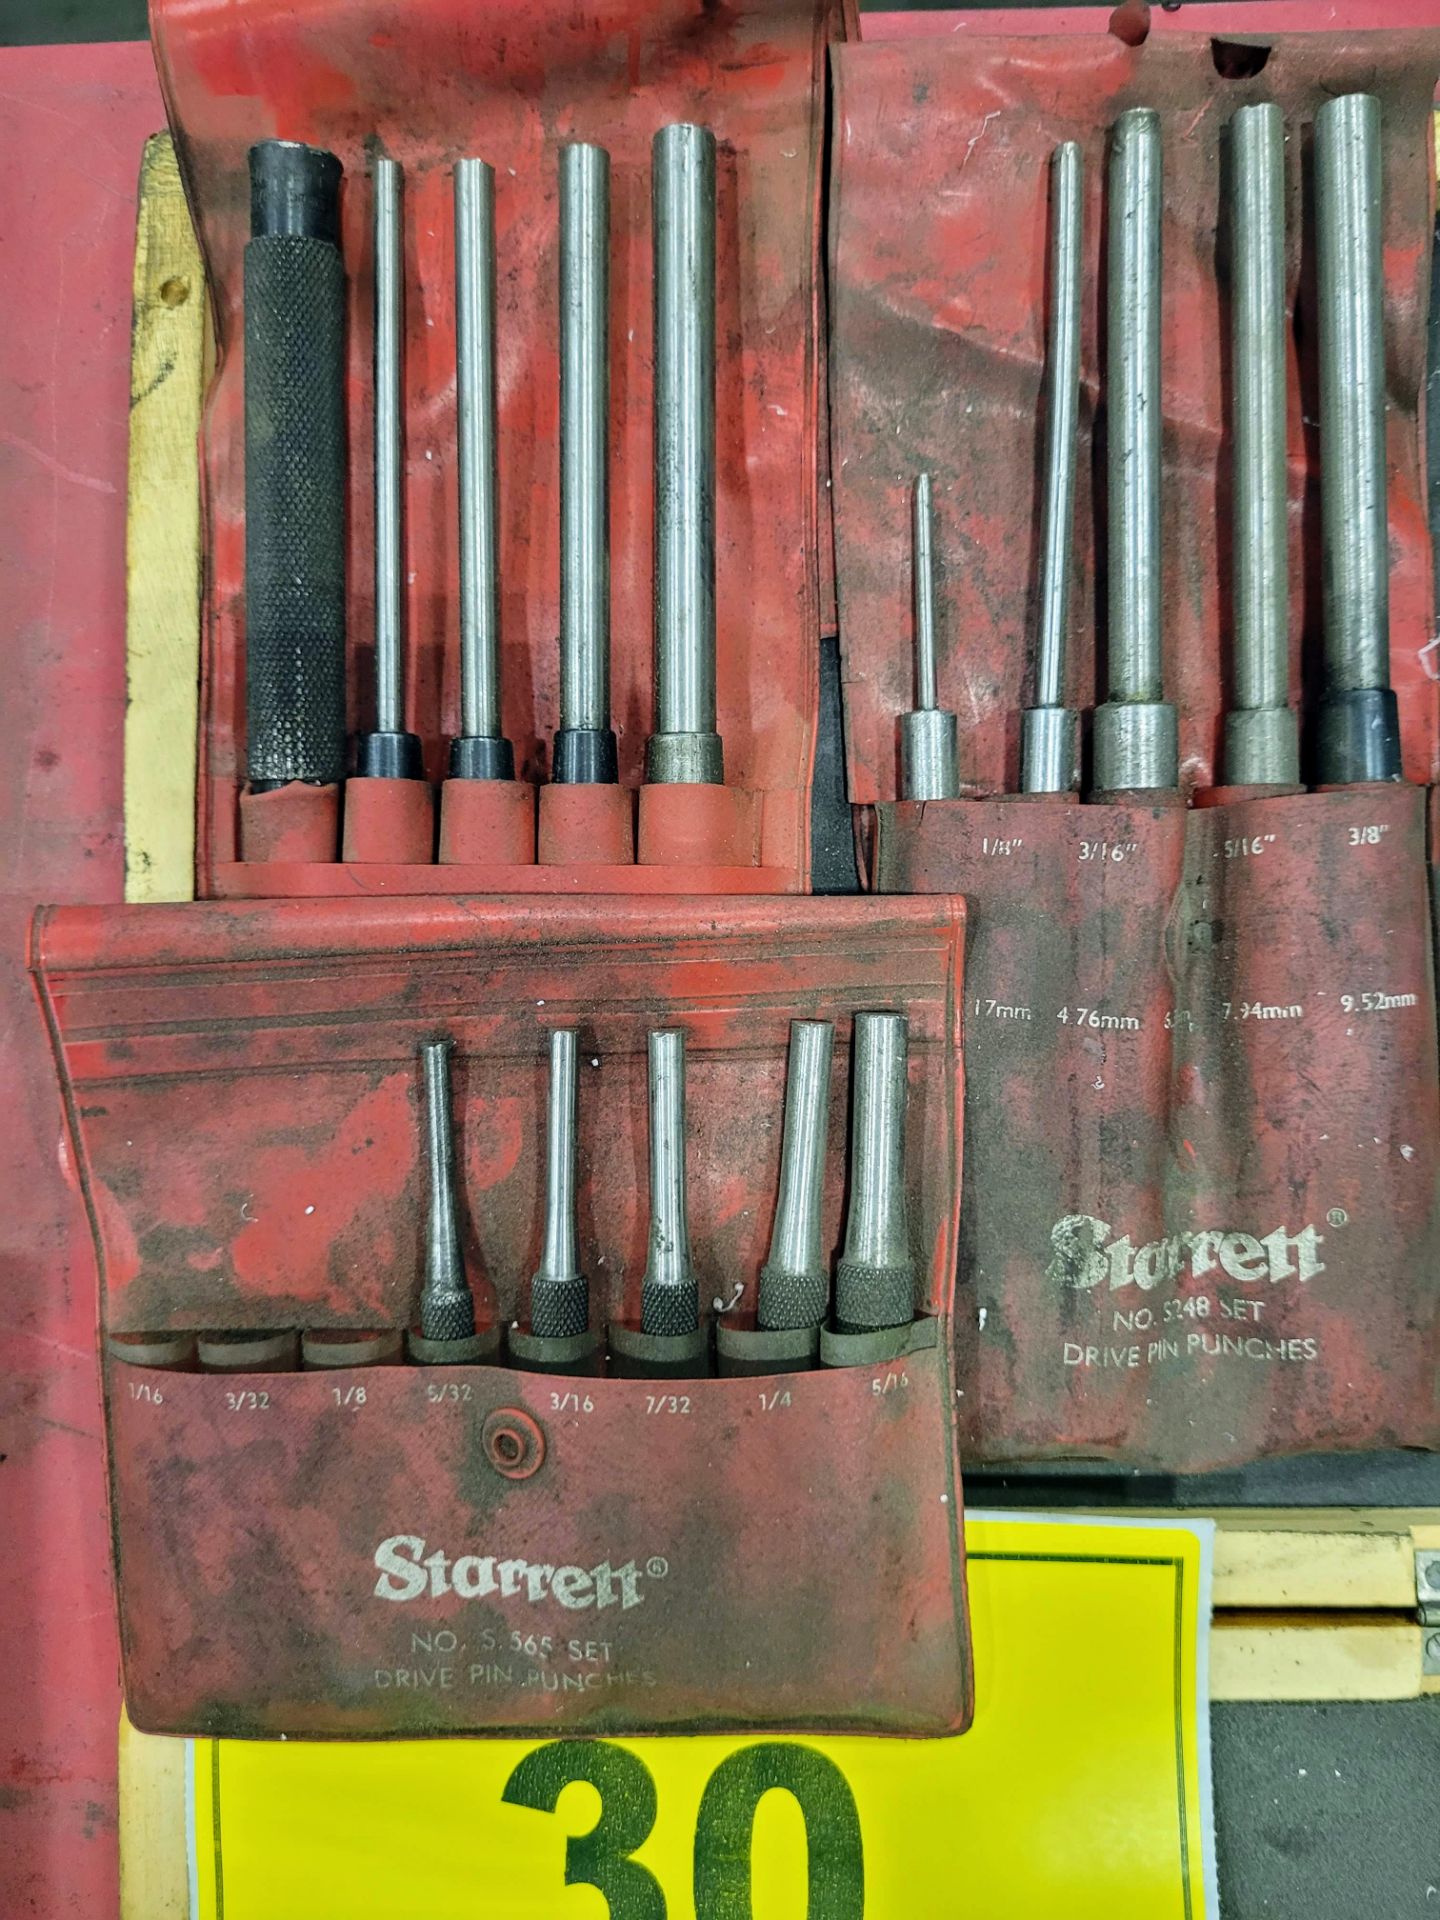 LOT - ASSORTED STARRETT DRIVE PUNCHES, CALIPERS, GAUGES, ETC. - Image 2 of 4